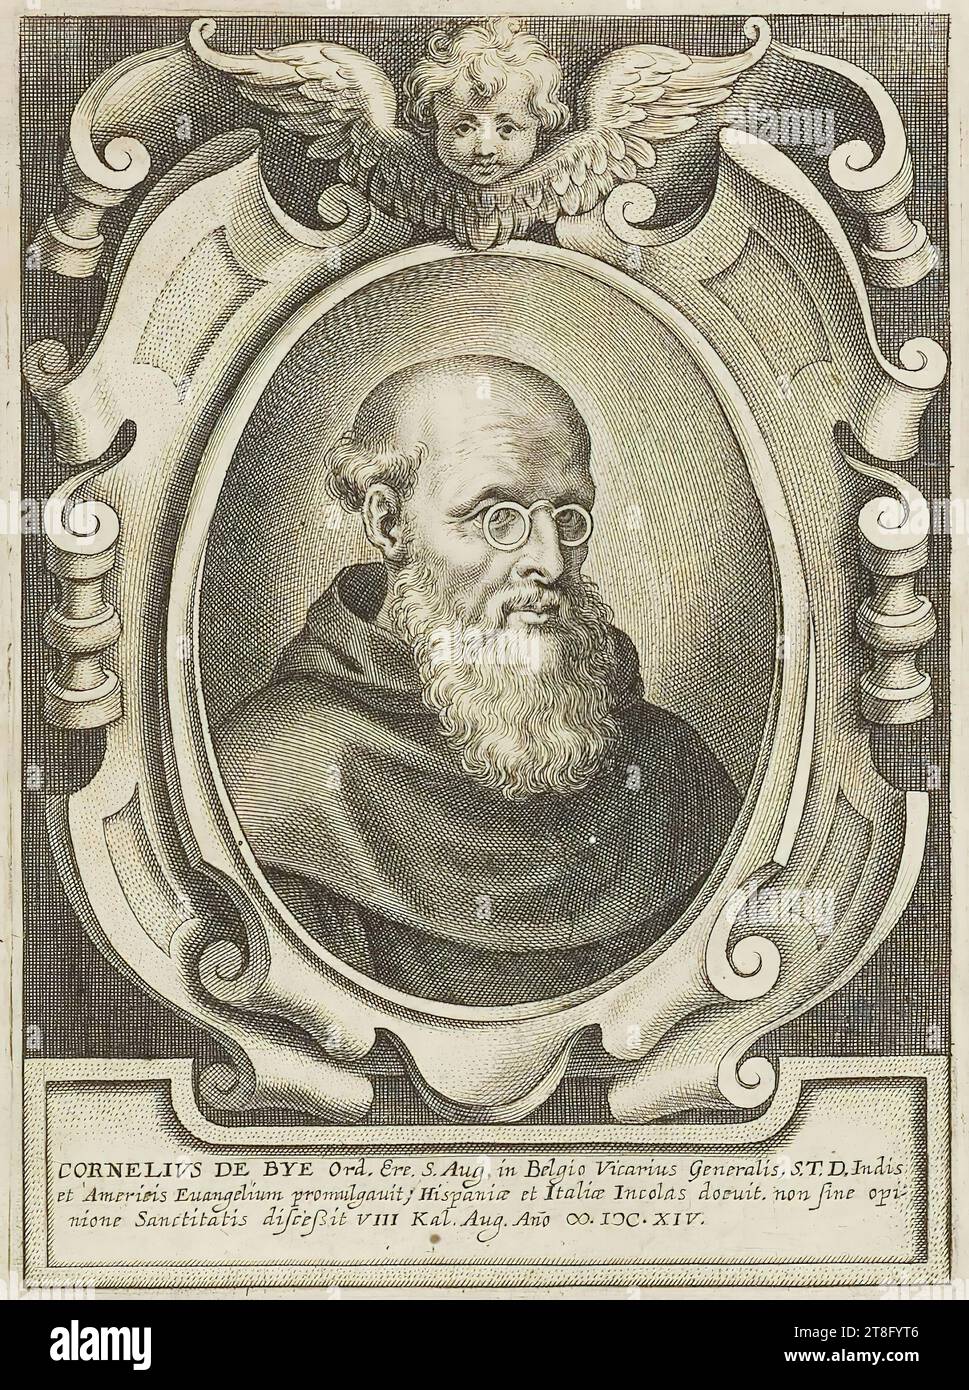 Probably designed by Jacques Franckaert II and engraved by Cornelius Galle. CORNELIUS DE BYE Ord. hon. St. Aug. in Belgium Vicar General, S.T.D. He preached the Gospel to the Indians and the Americas, taught the inhabitants of Spain and Italy, and departed not without the promise of sanctity. Aug. In the year ∞ IƆC. XIV. Illustration from: C. de Corte, Men of illustrious men from the order of hermits..., 1636 Stock Photo